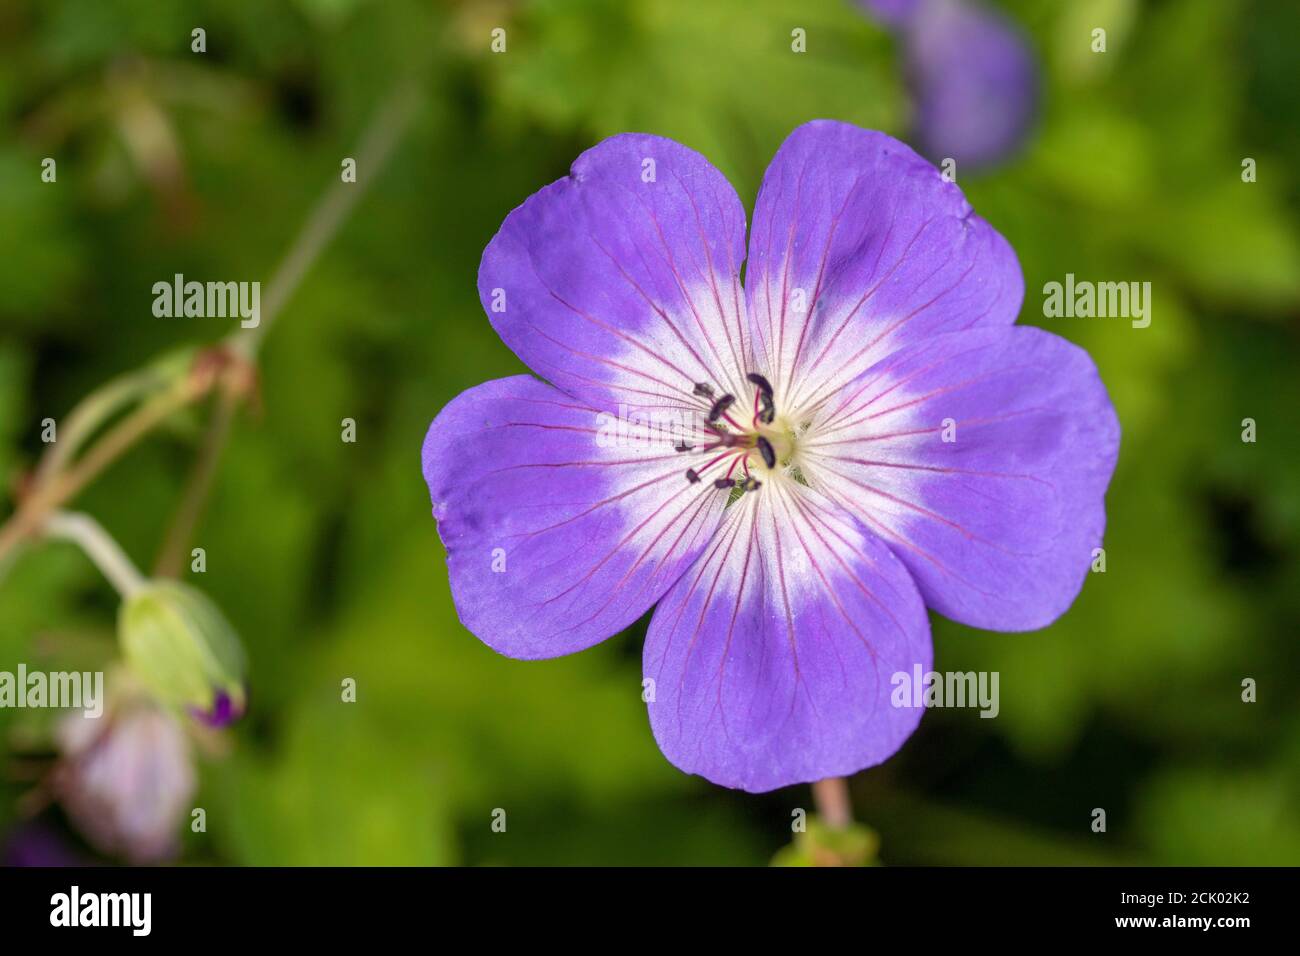 Geranium Rozanne 'Great' flower and foliage close-up Stock Photo